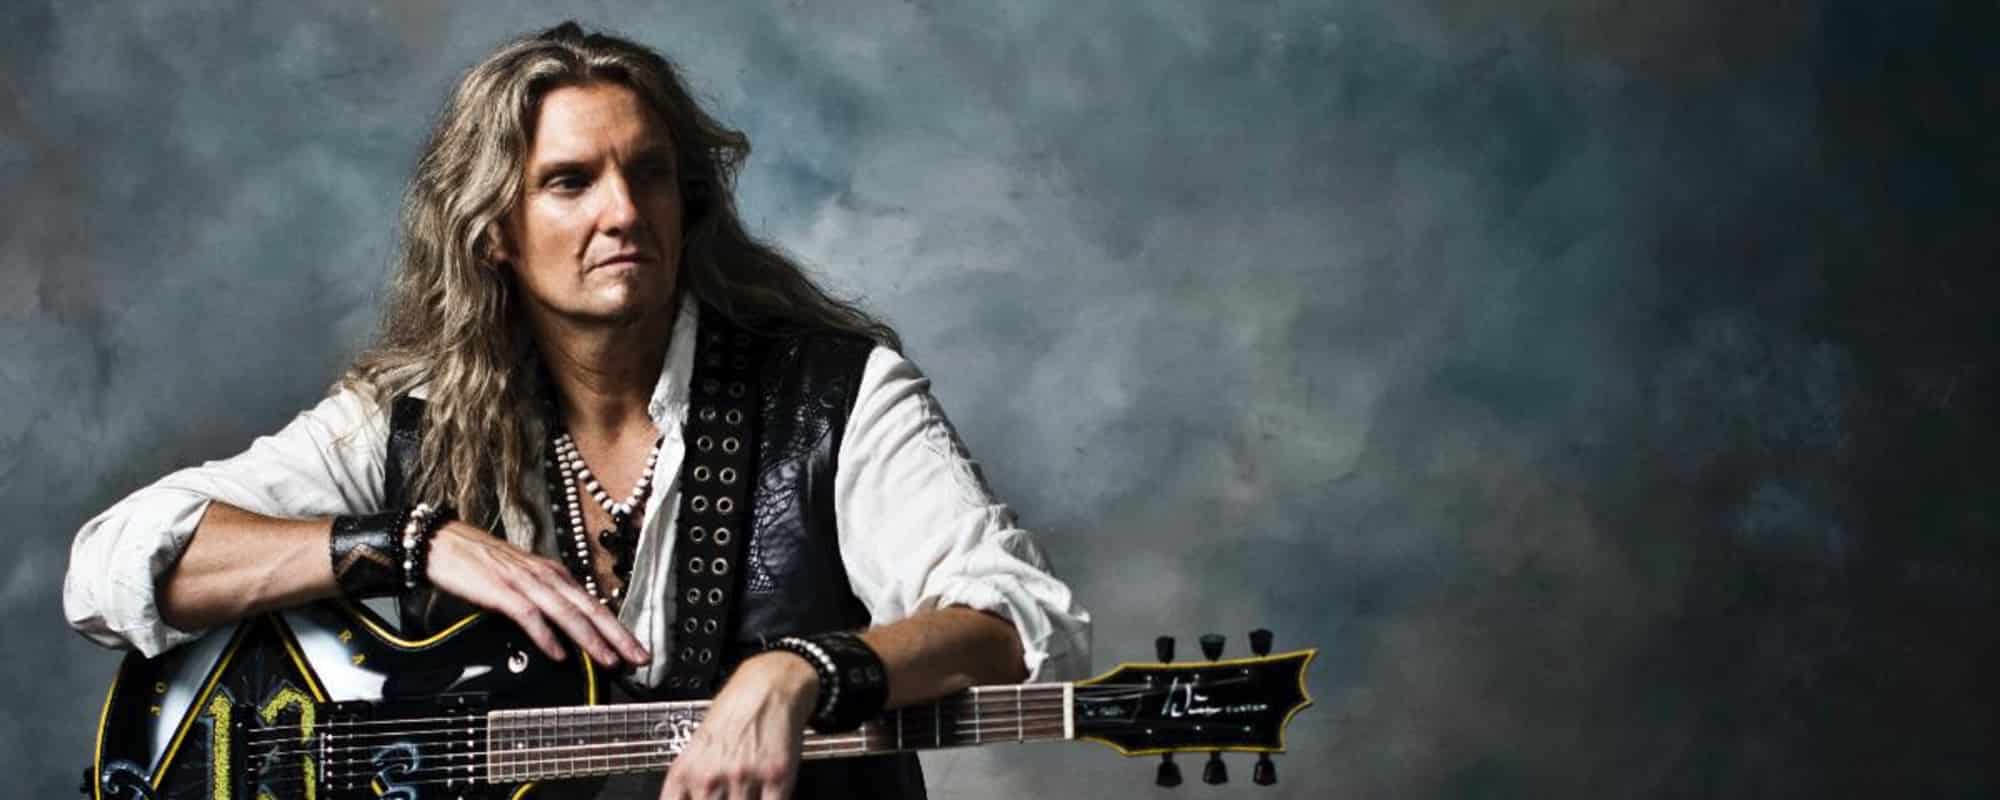 Joel Hoekstra Suggests Following Your Heart When it Comes to Songwriting